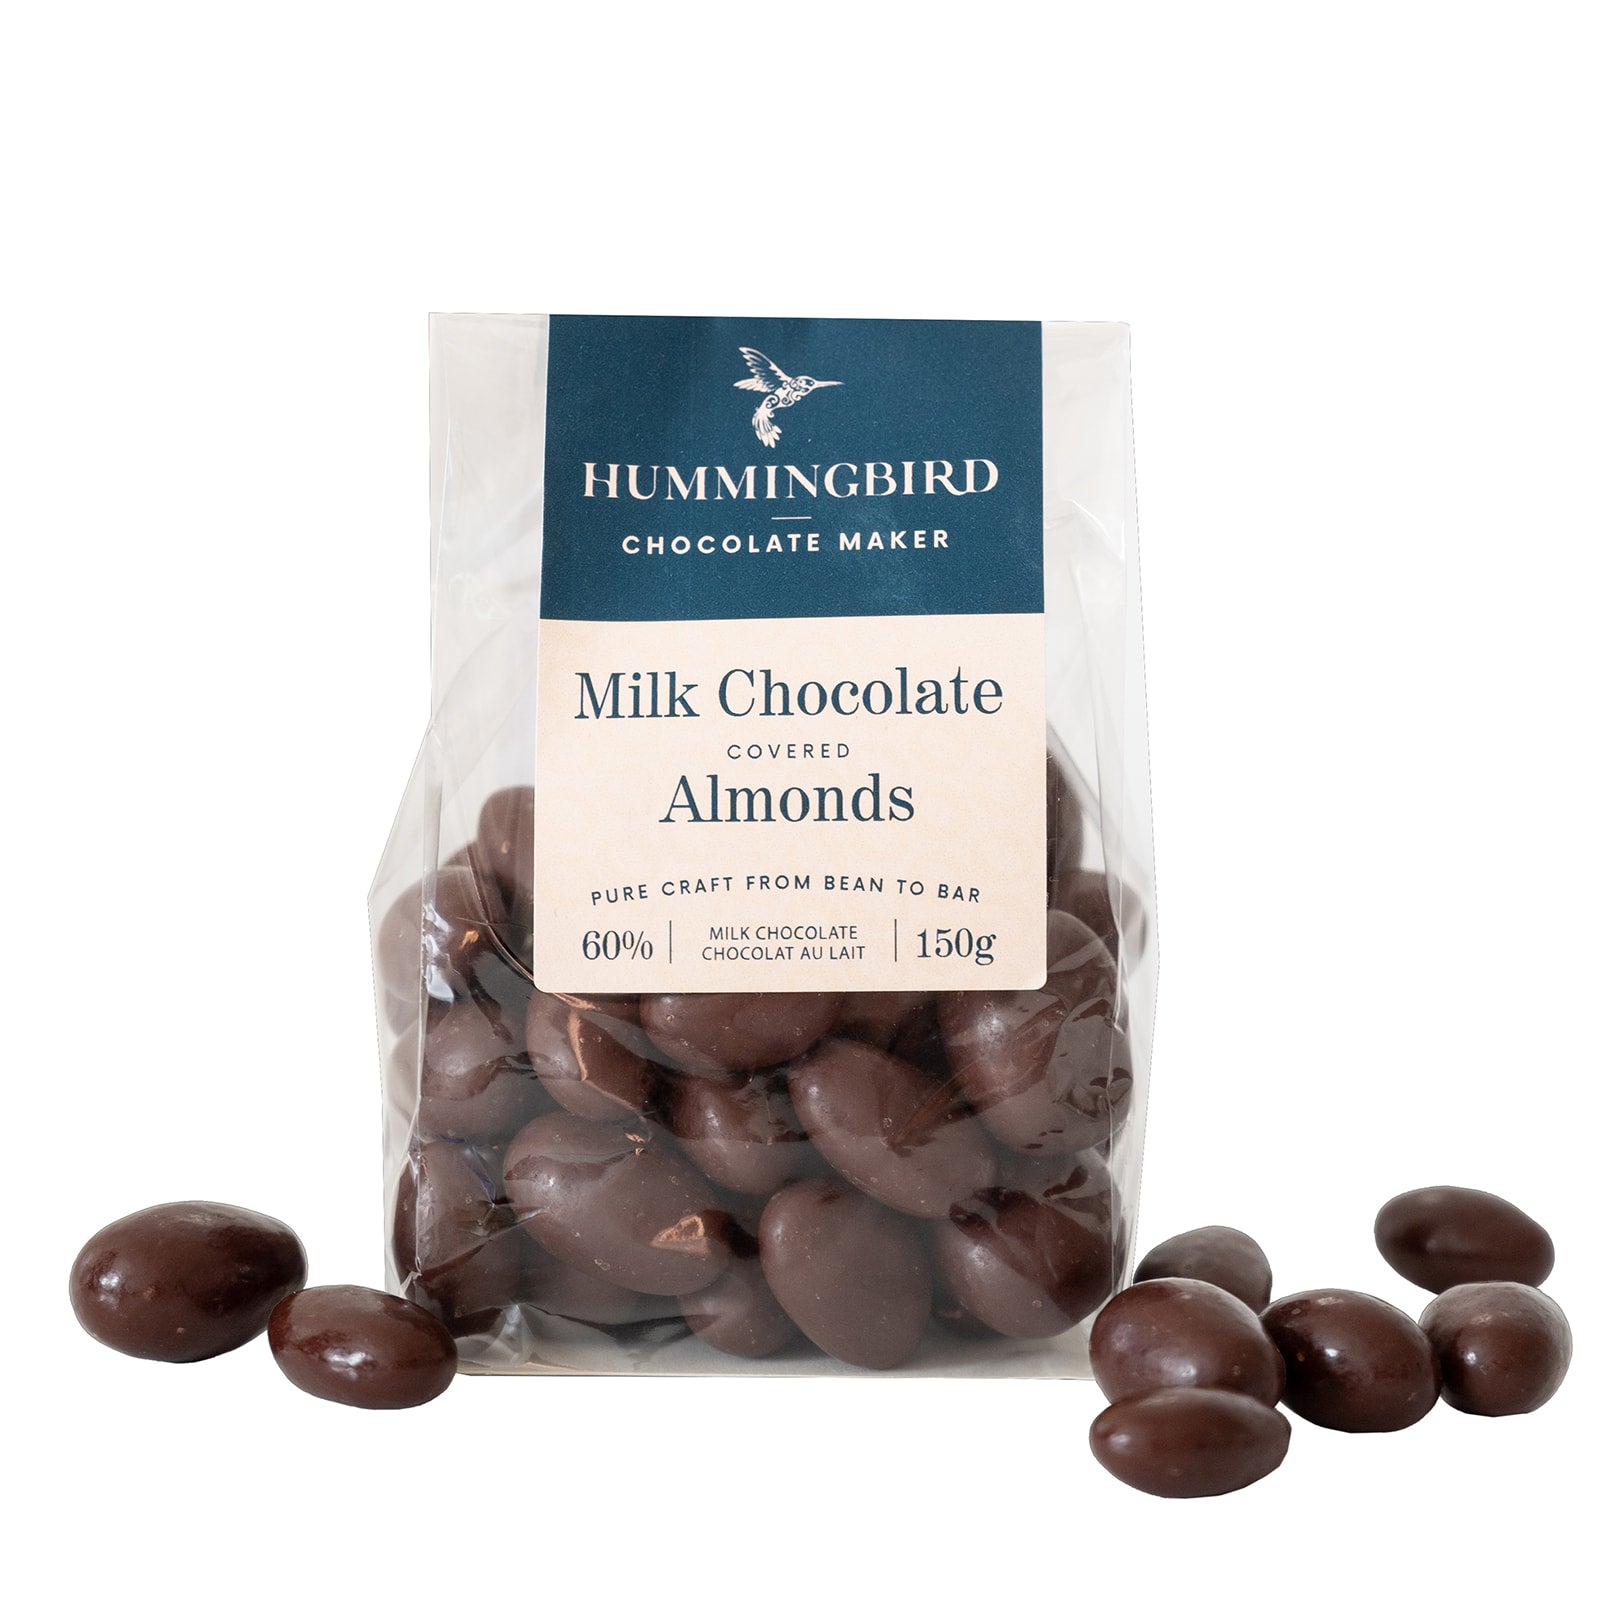 Chocolate Covered Almonds: Roasted almonds covered in thick layer of milk chocolate